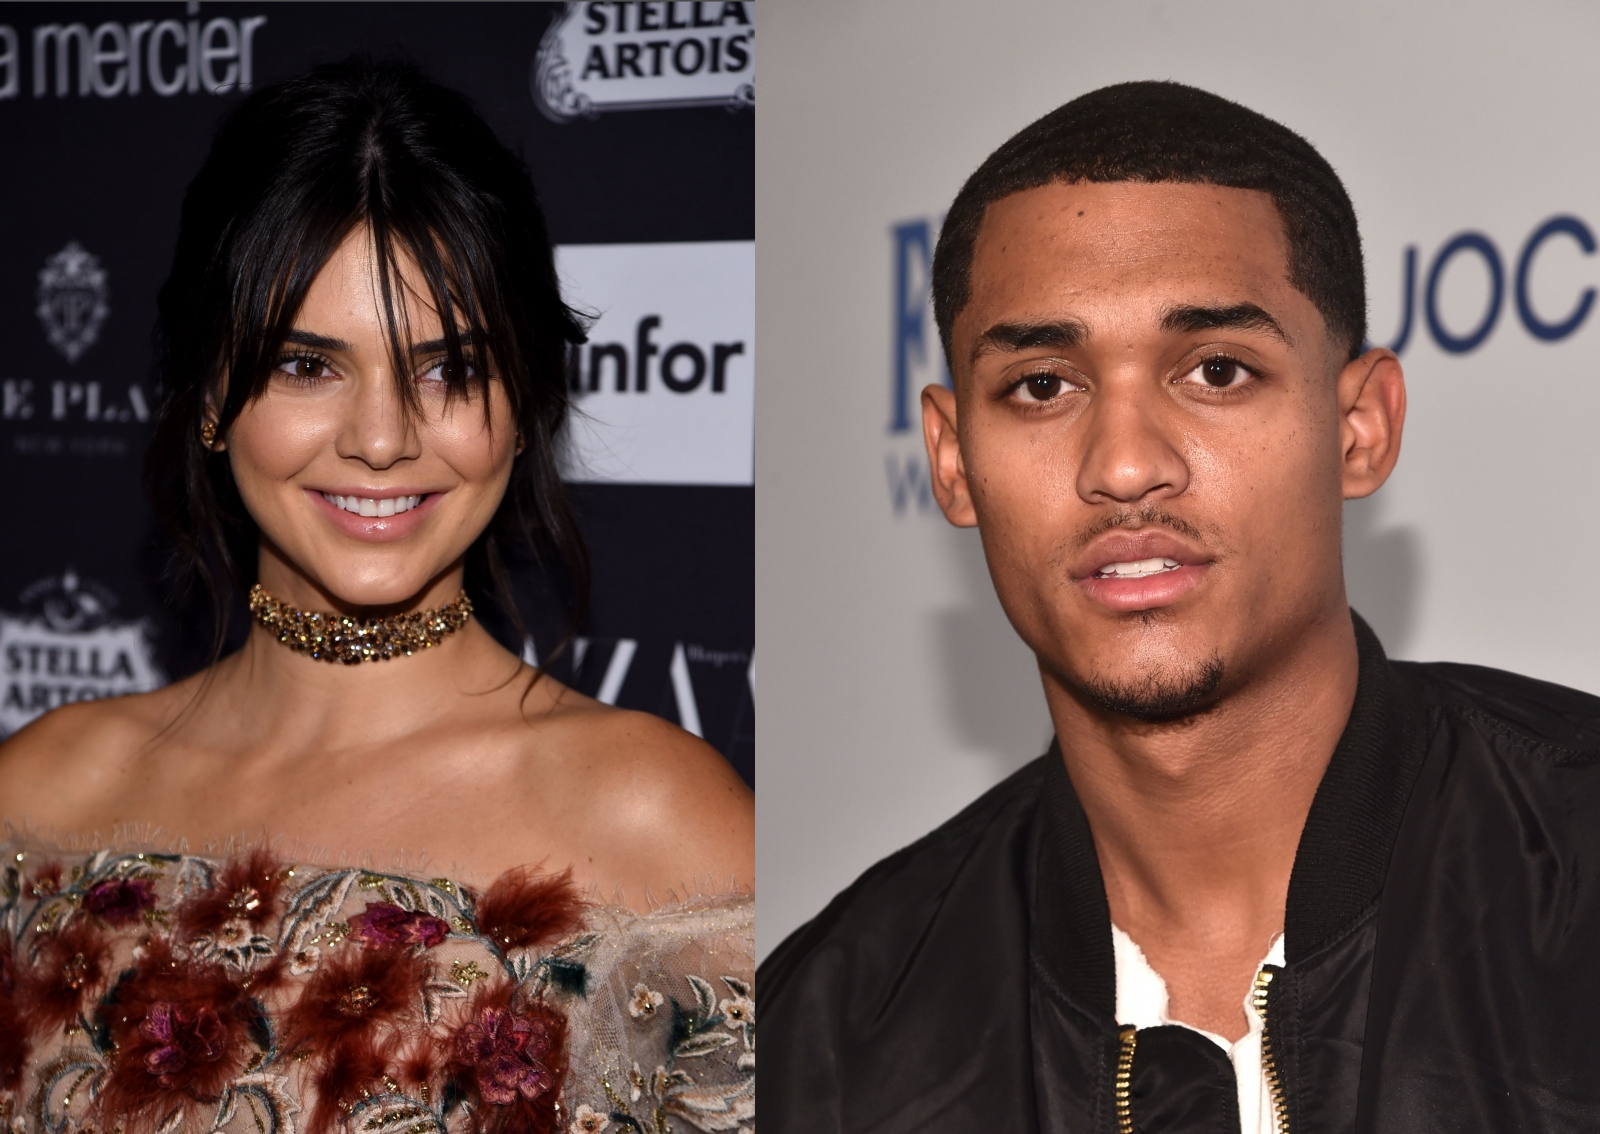 Bad factor Rusty On board Kendall Jenner and LA Lakers' Jordan Clarkson reignite romance rumours with  intimate appearance